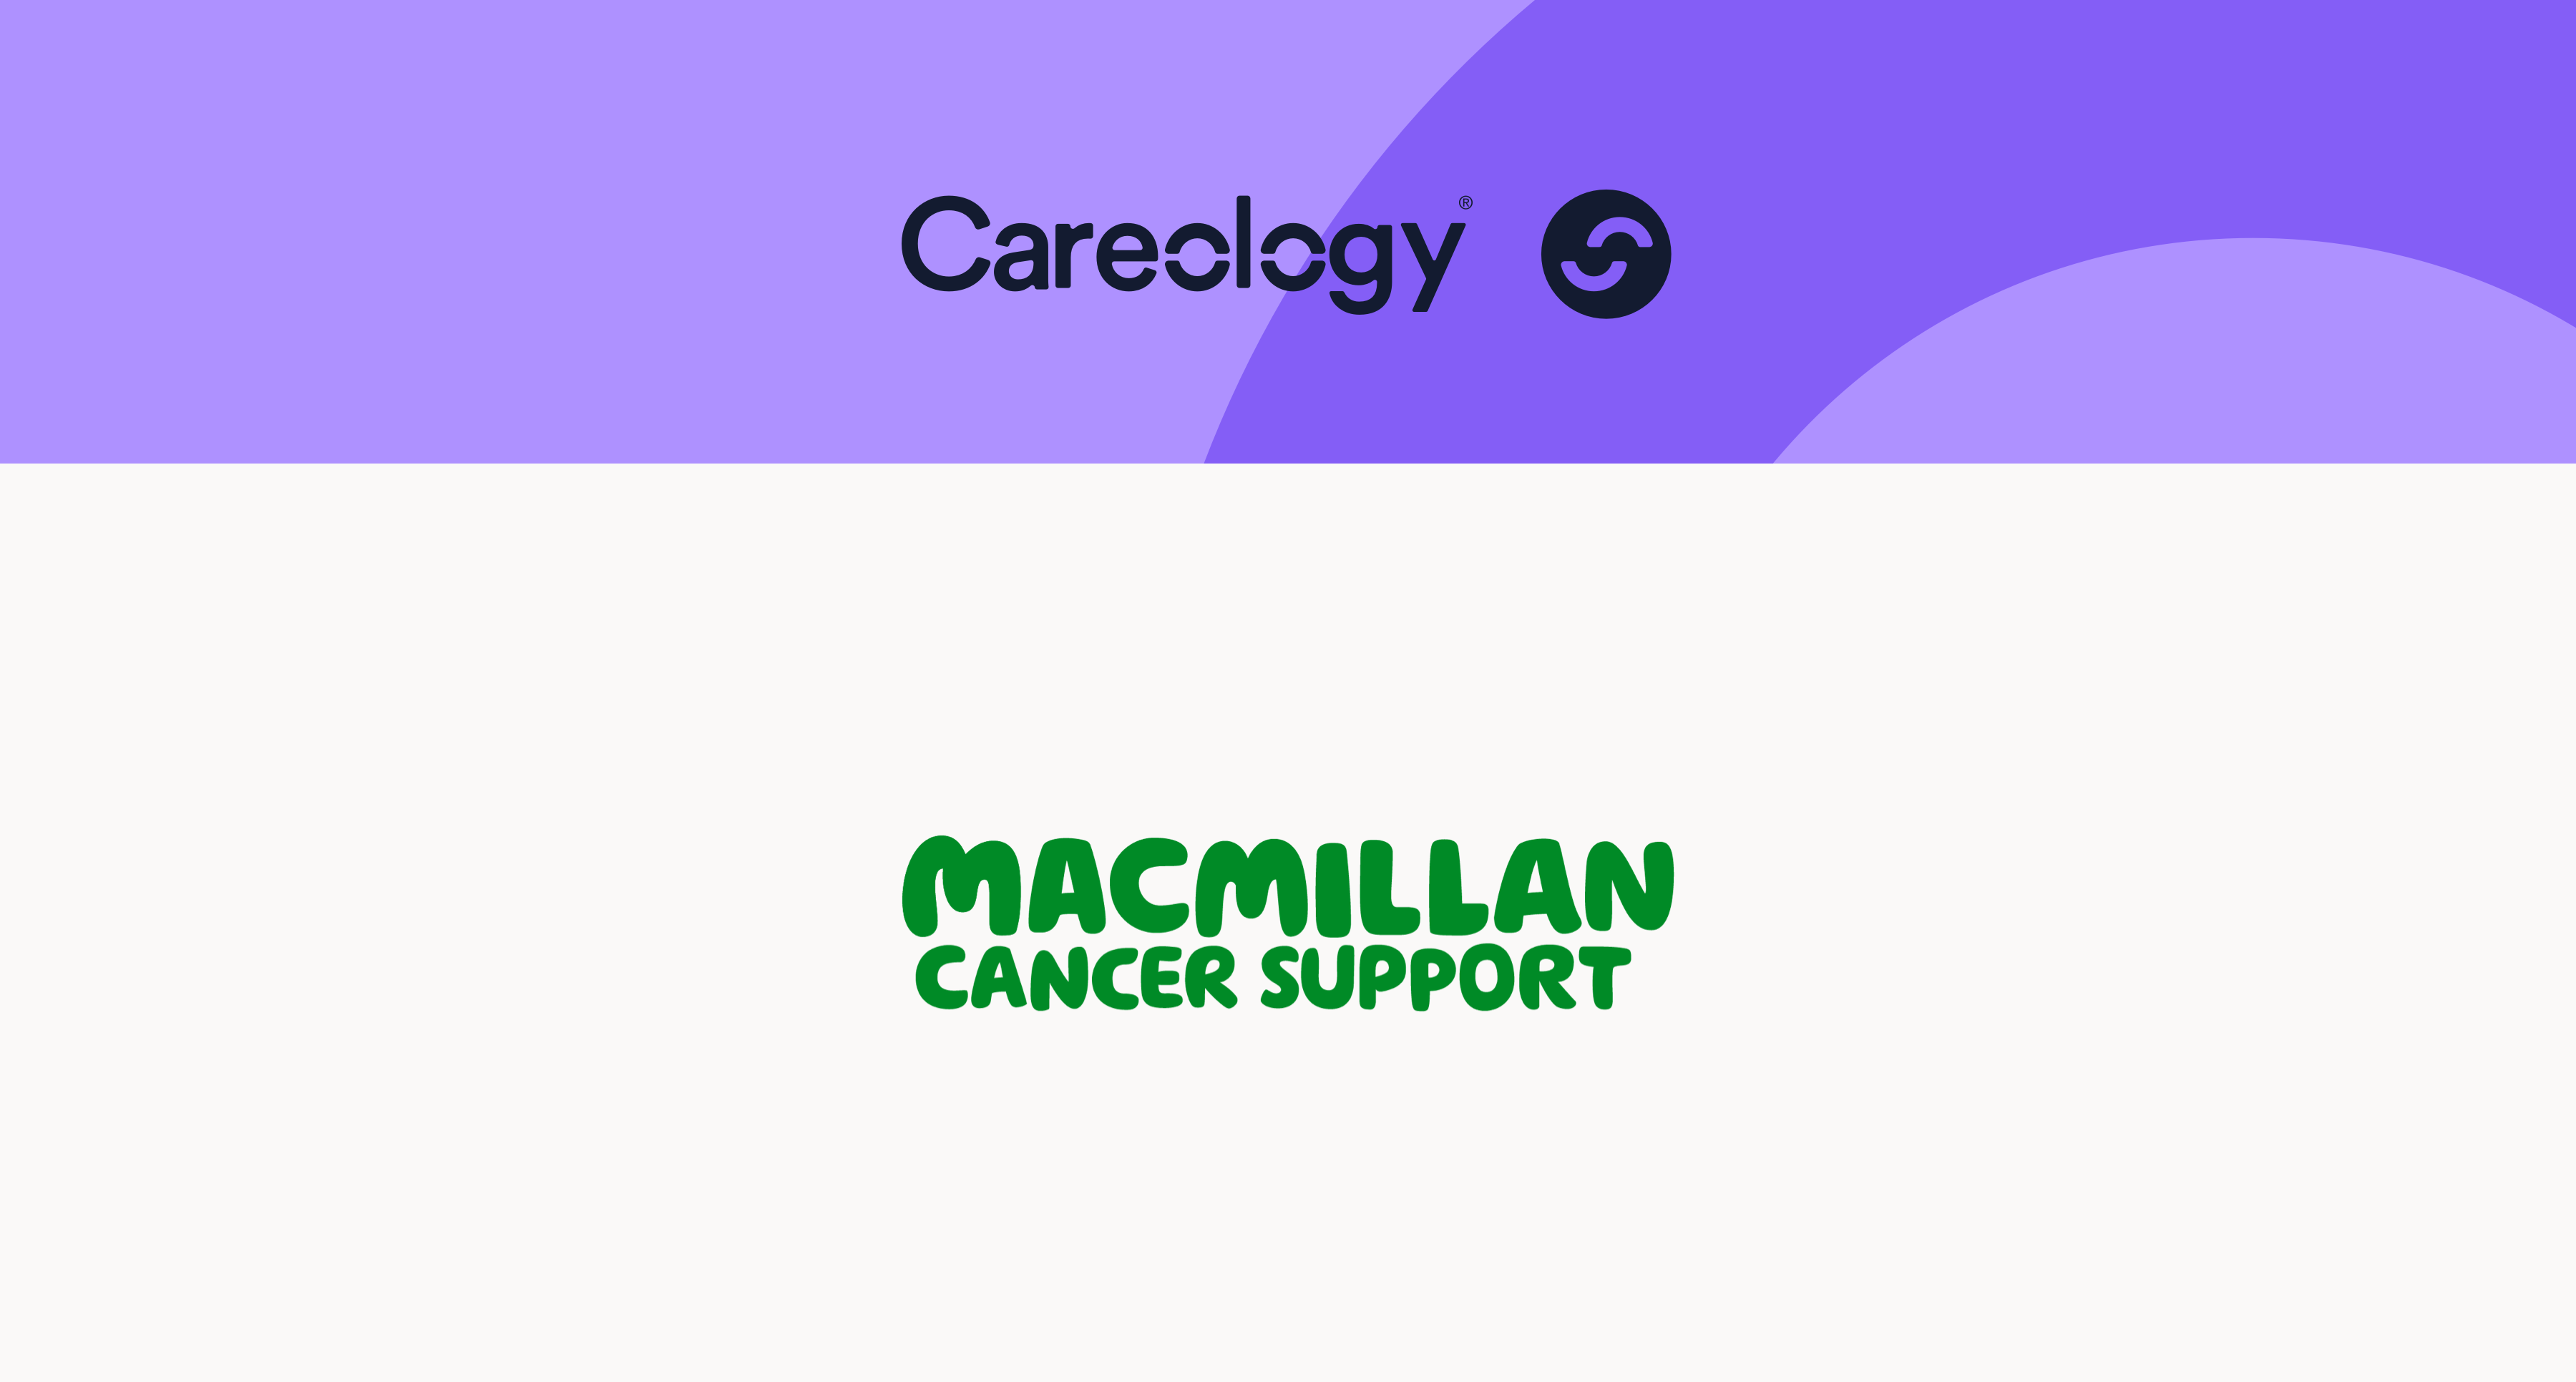 Careology recommended by Macmillan Cancer Support